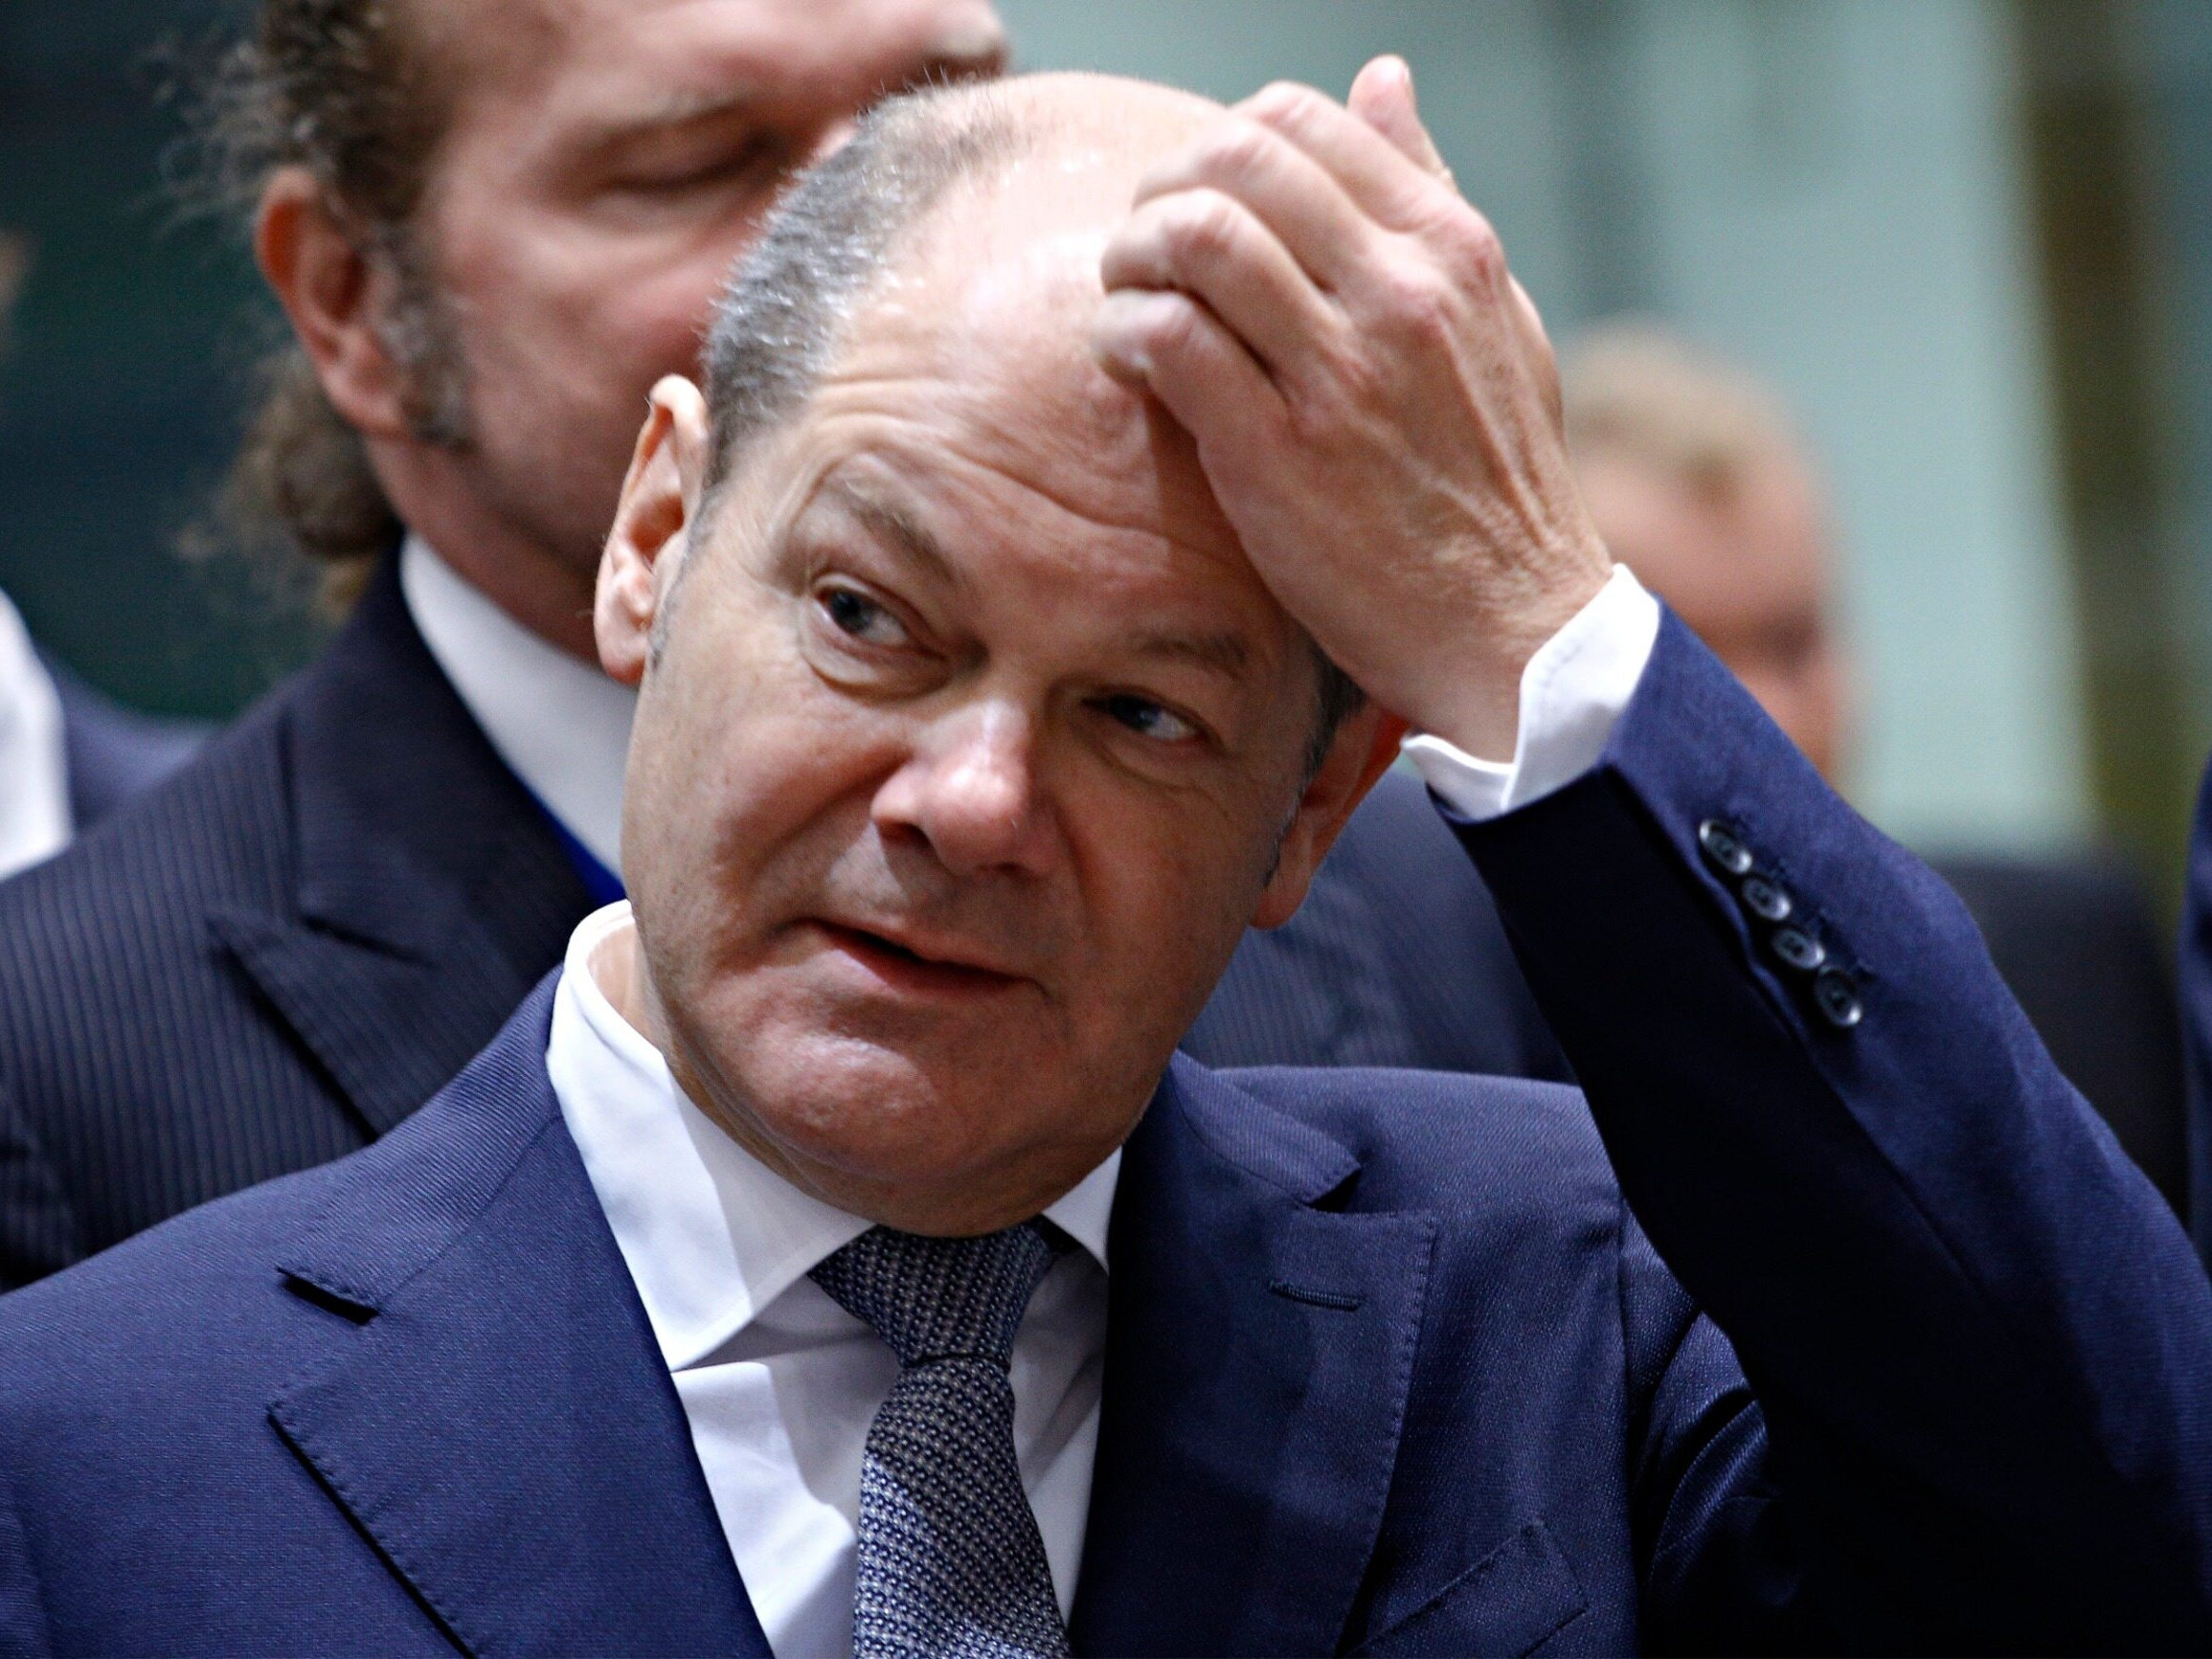 Scholz revealed to Macron what he talked about with Putin after the invasion.  What did he hear?